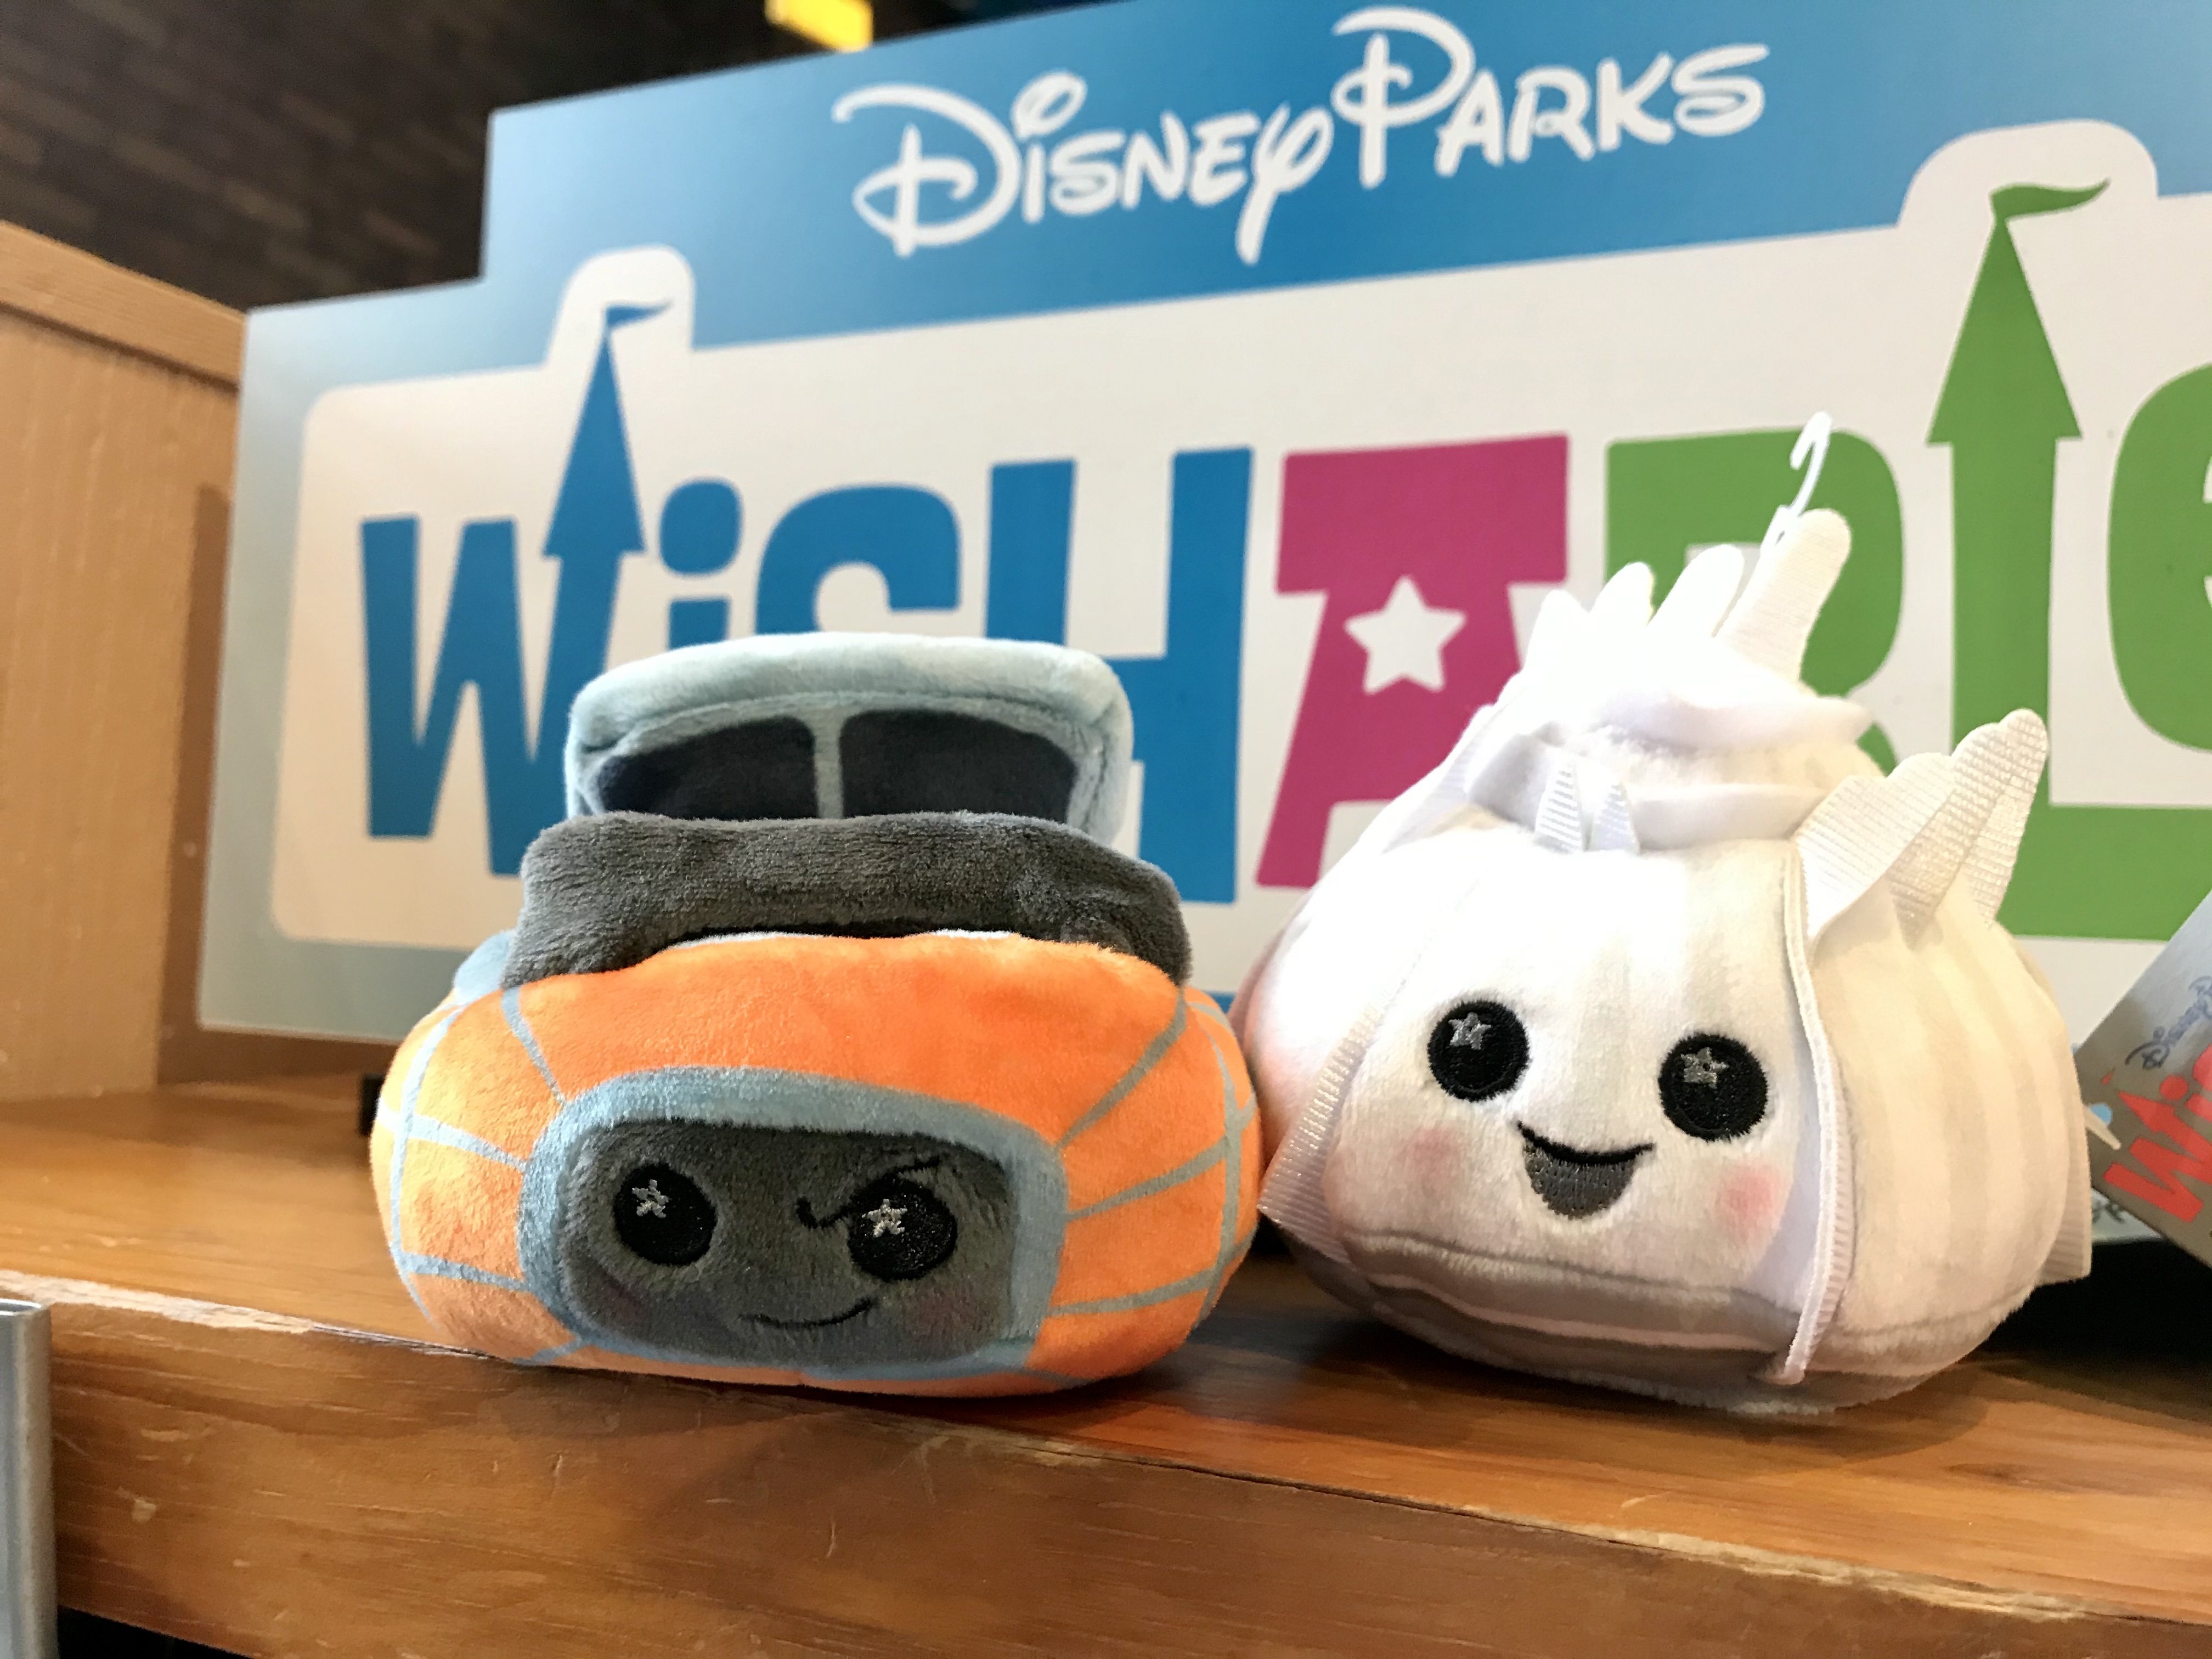 Disney Parks Wishables Plush Space Mountain Ride 45th Anniversary New In Hand